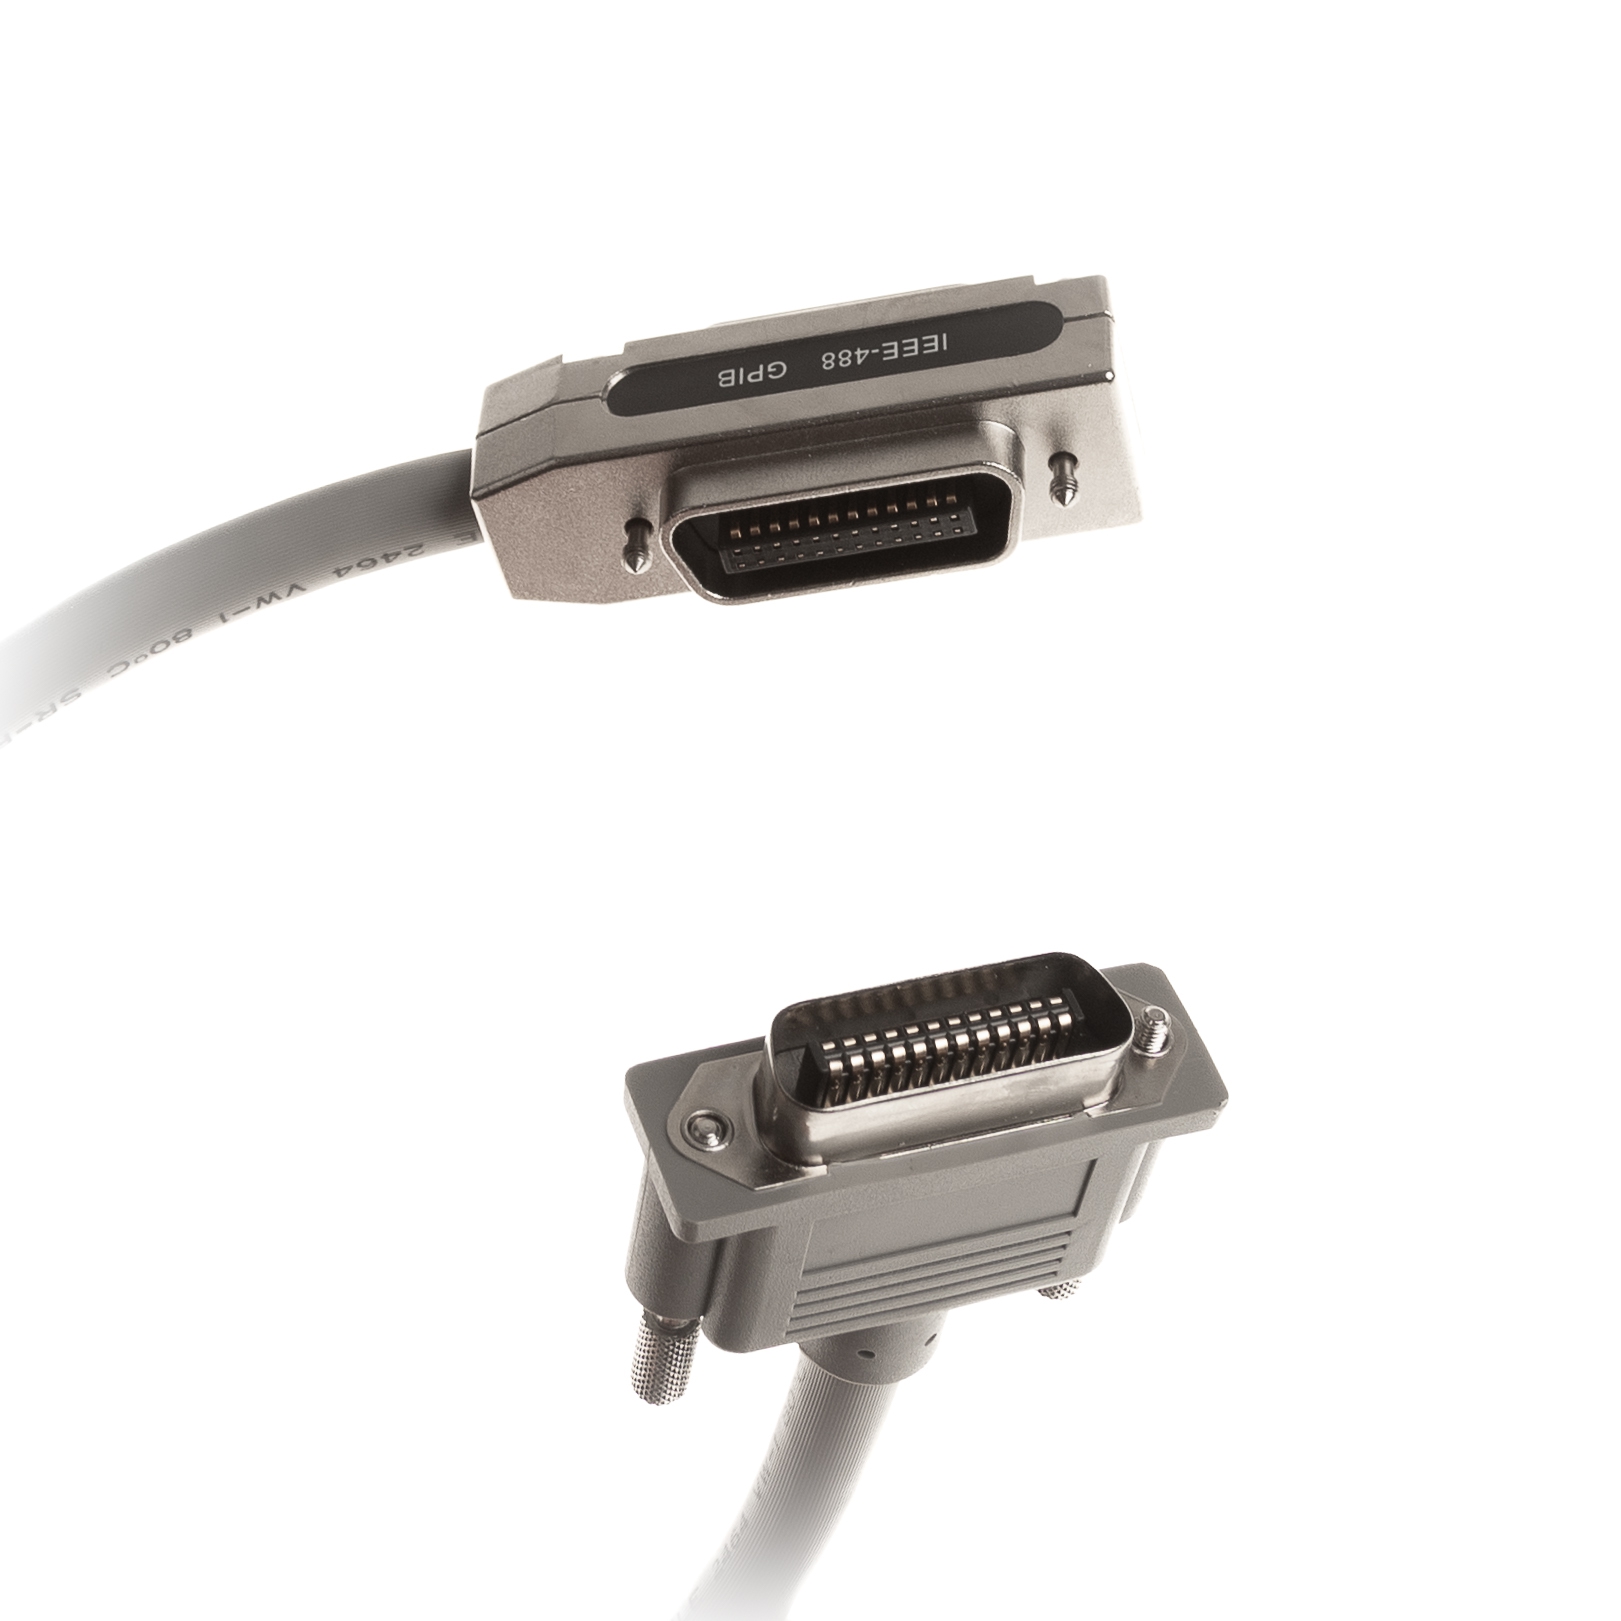 IEEE 488 bus cable GPIB 1x C24 male/female  to 1x C24 male 4m